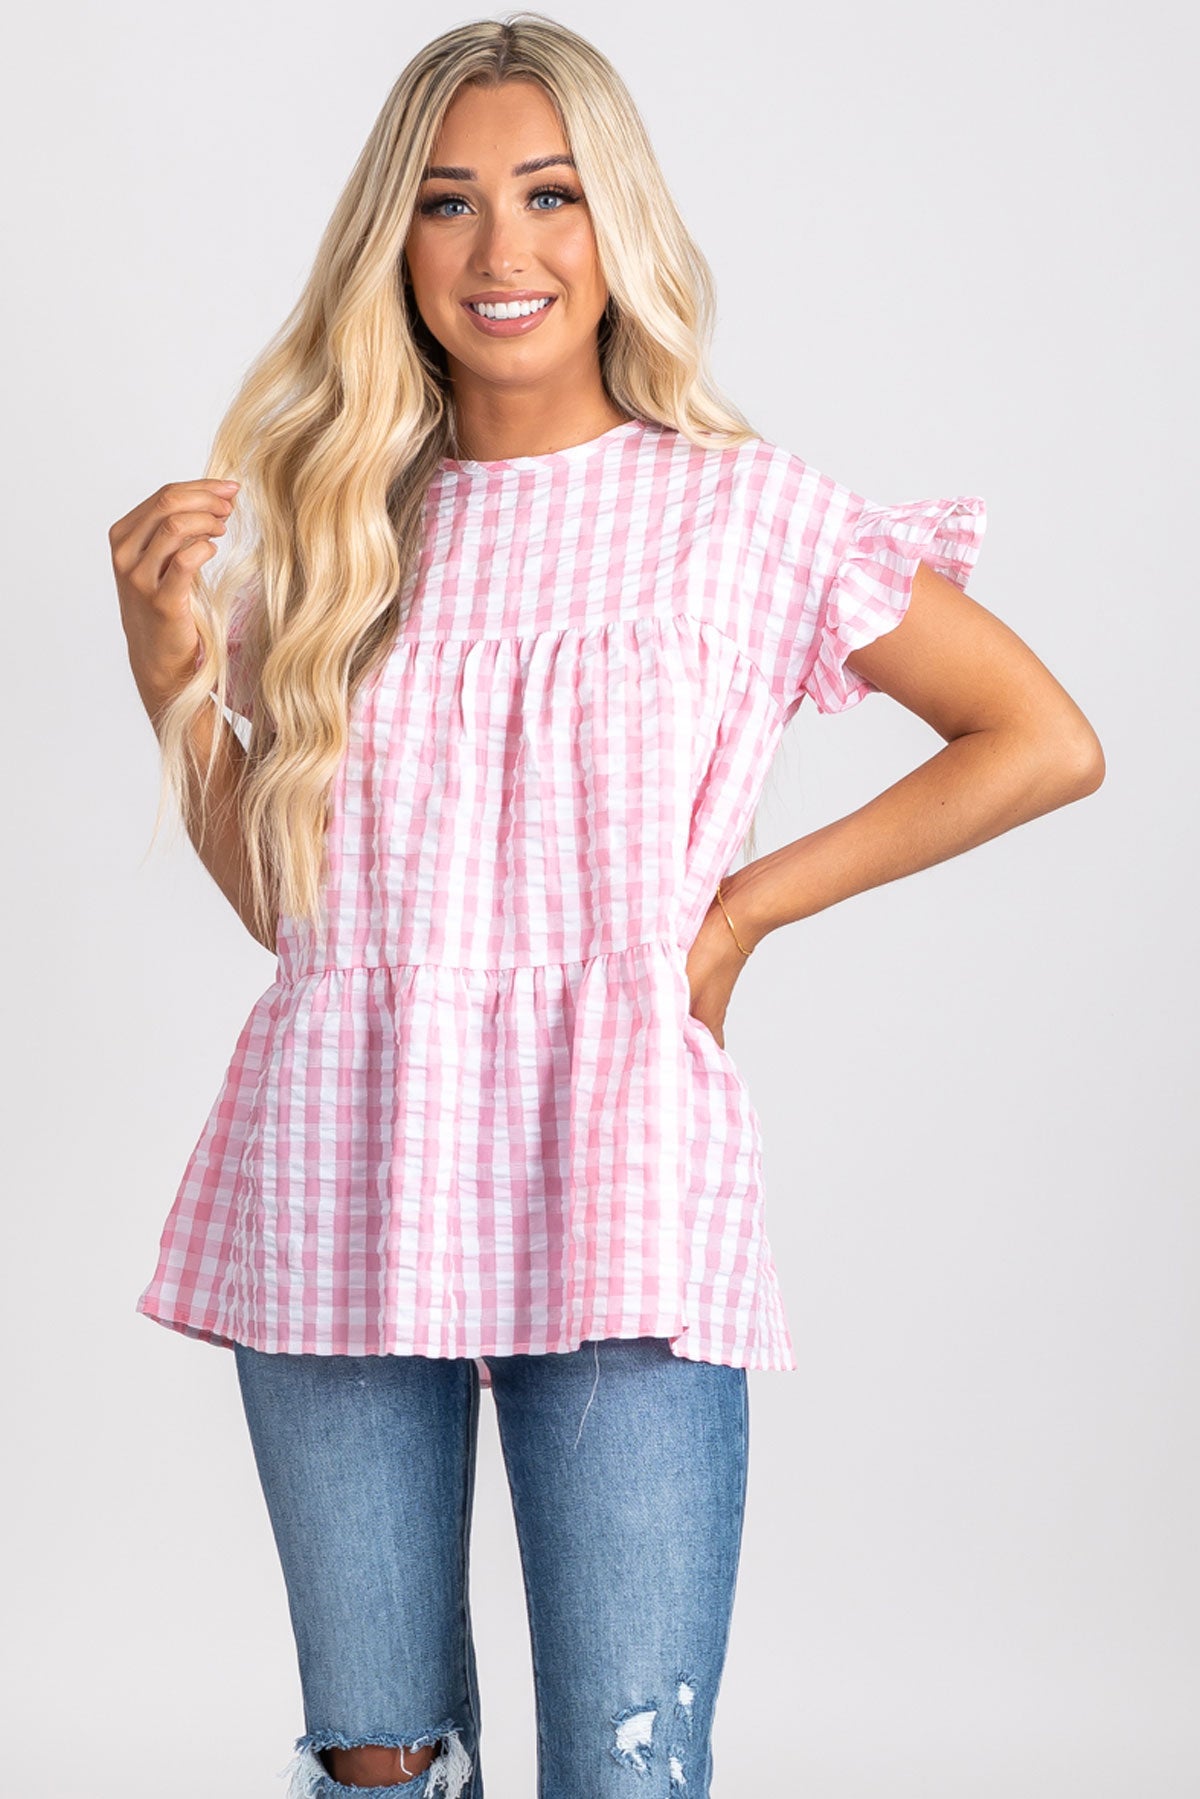 Gingham Blouse for women in pink, navy, black, and yellow